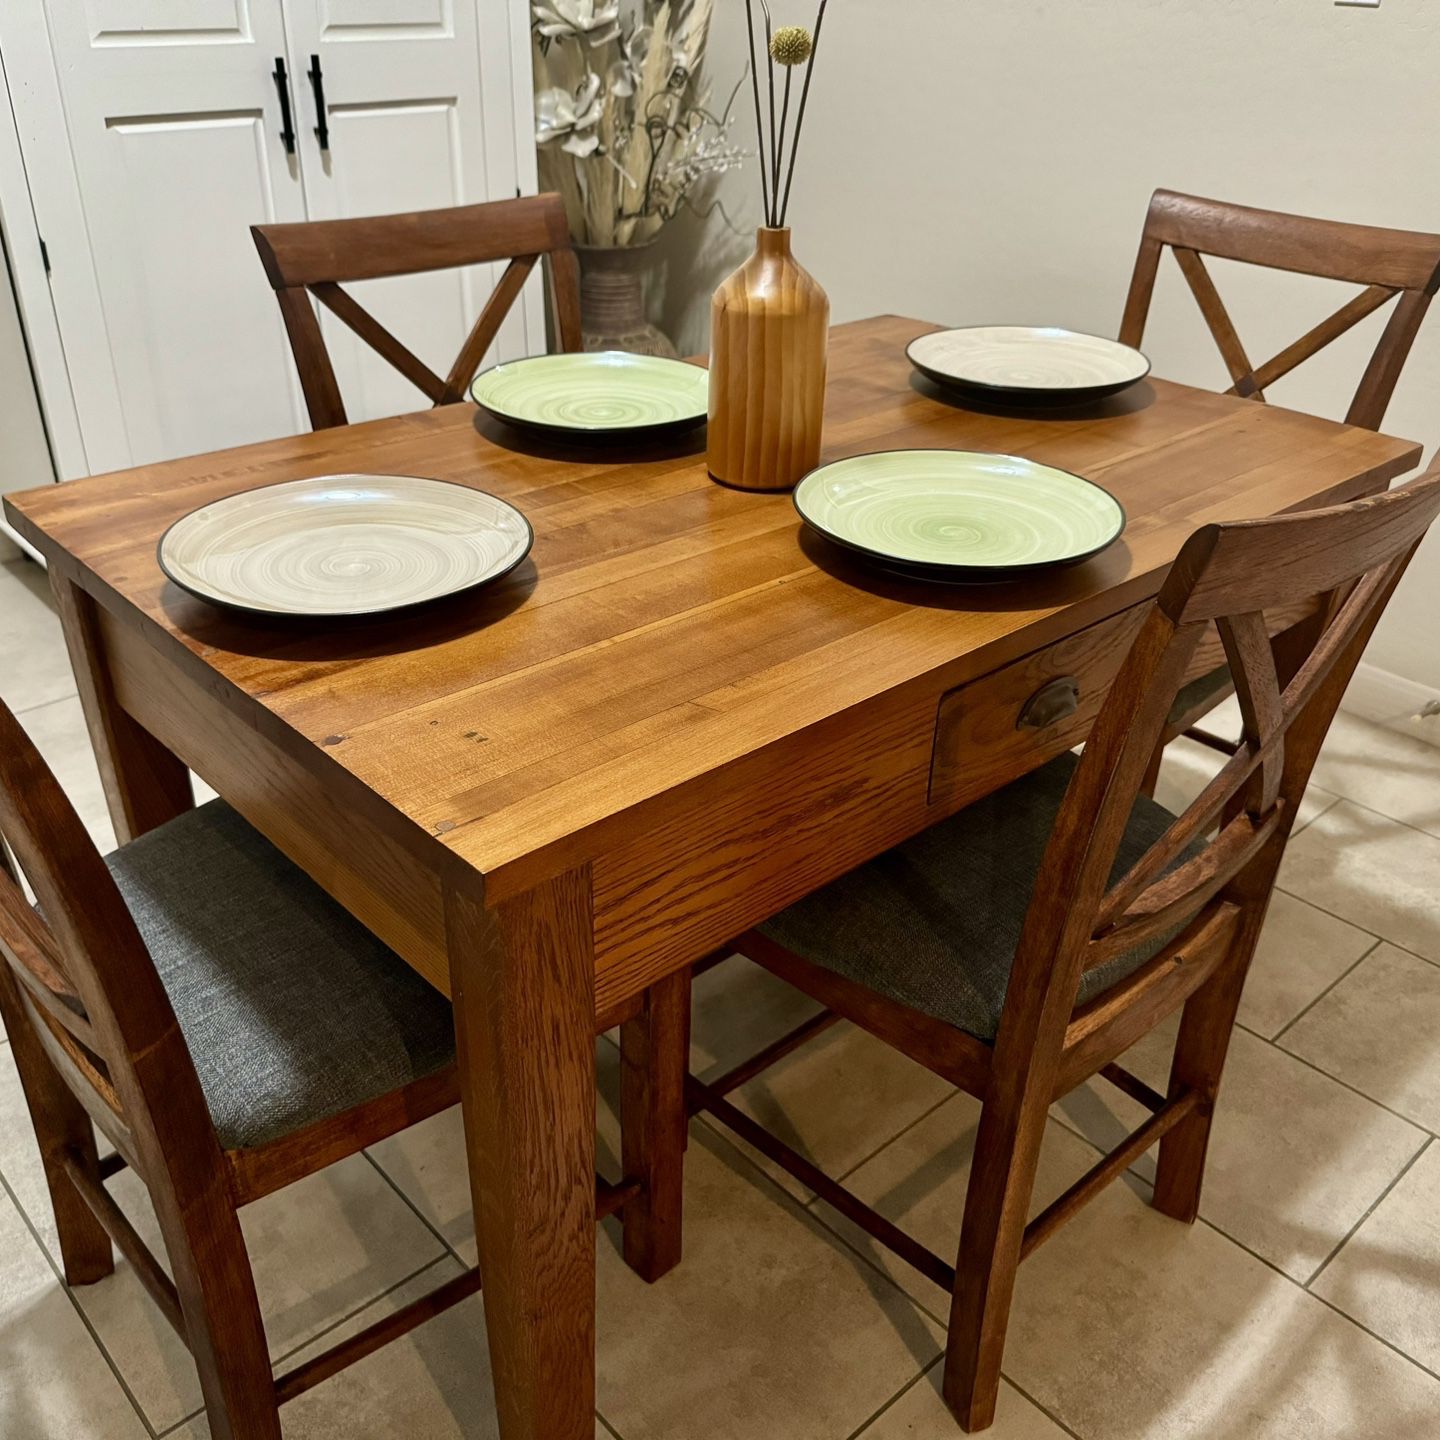 PENDING SALE- Dining Table and Chairs